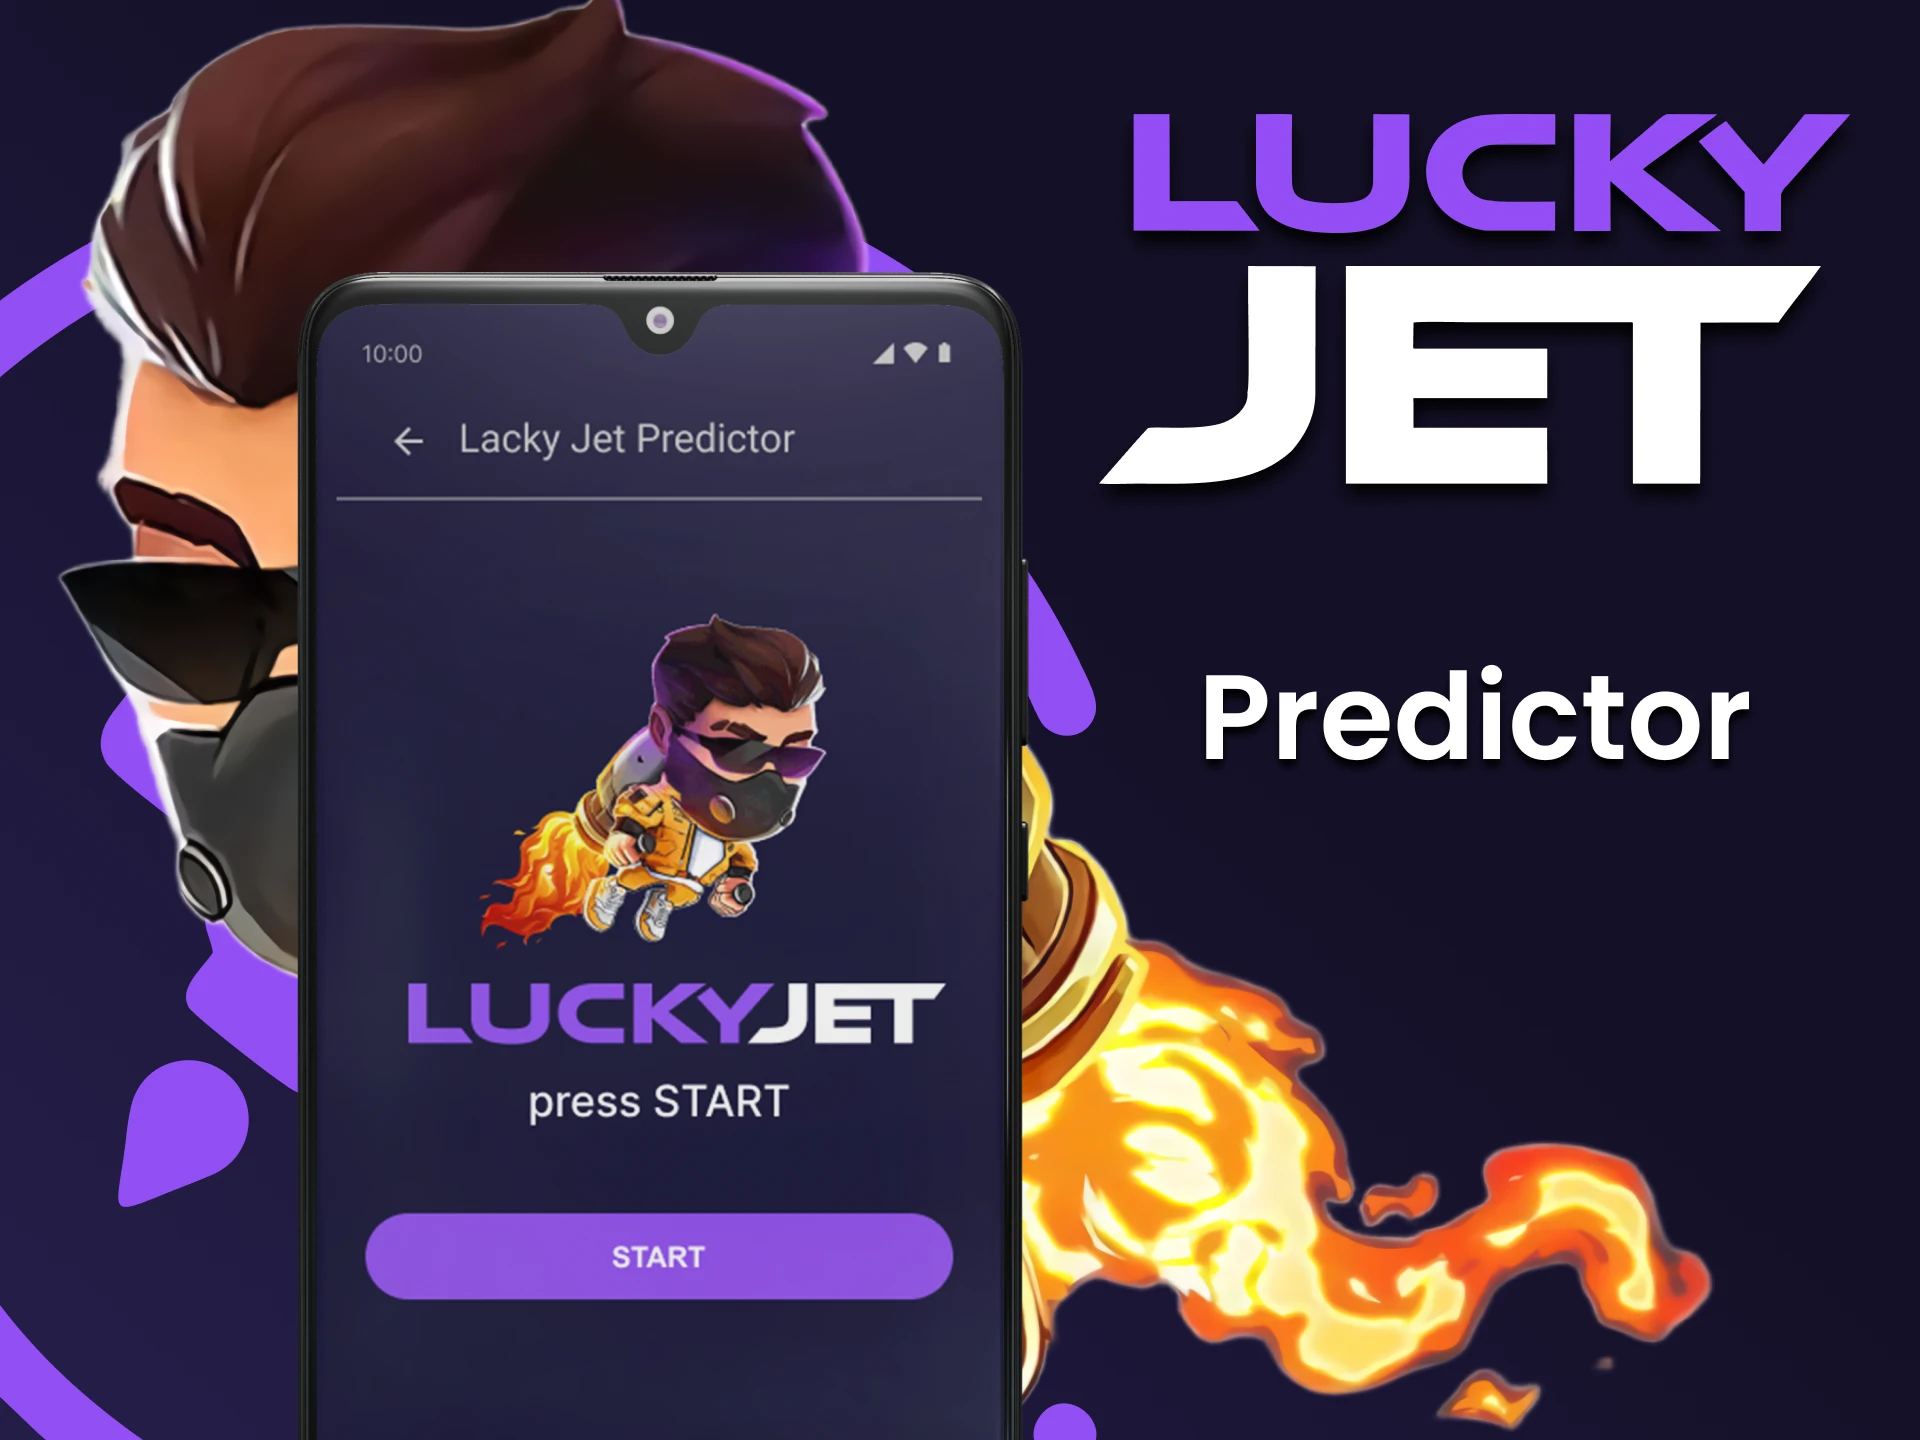 Do not try to use third party software to play Lucky Jet.